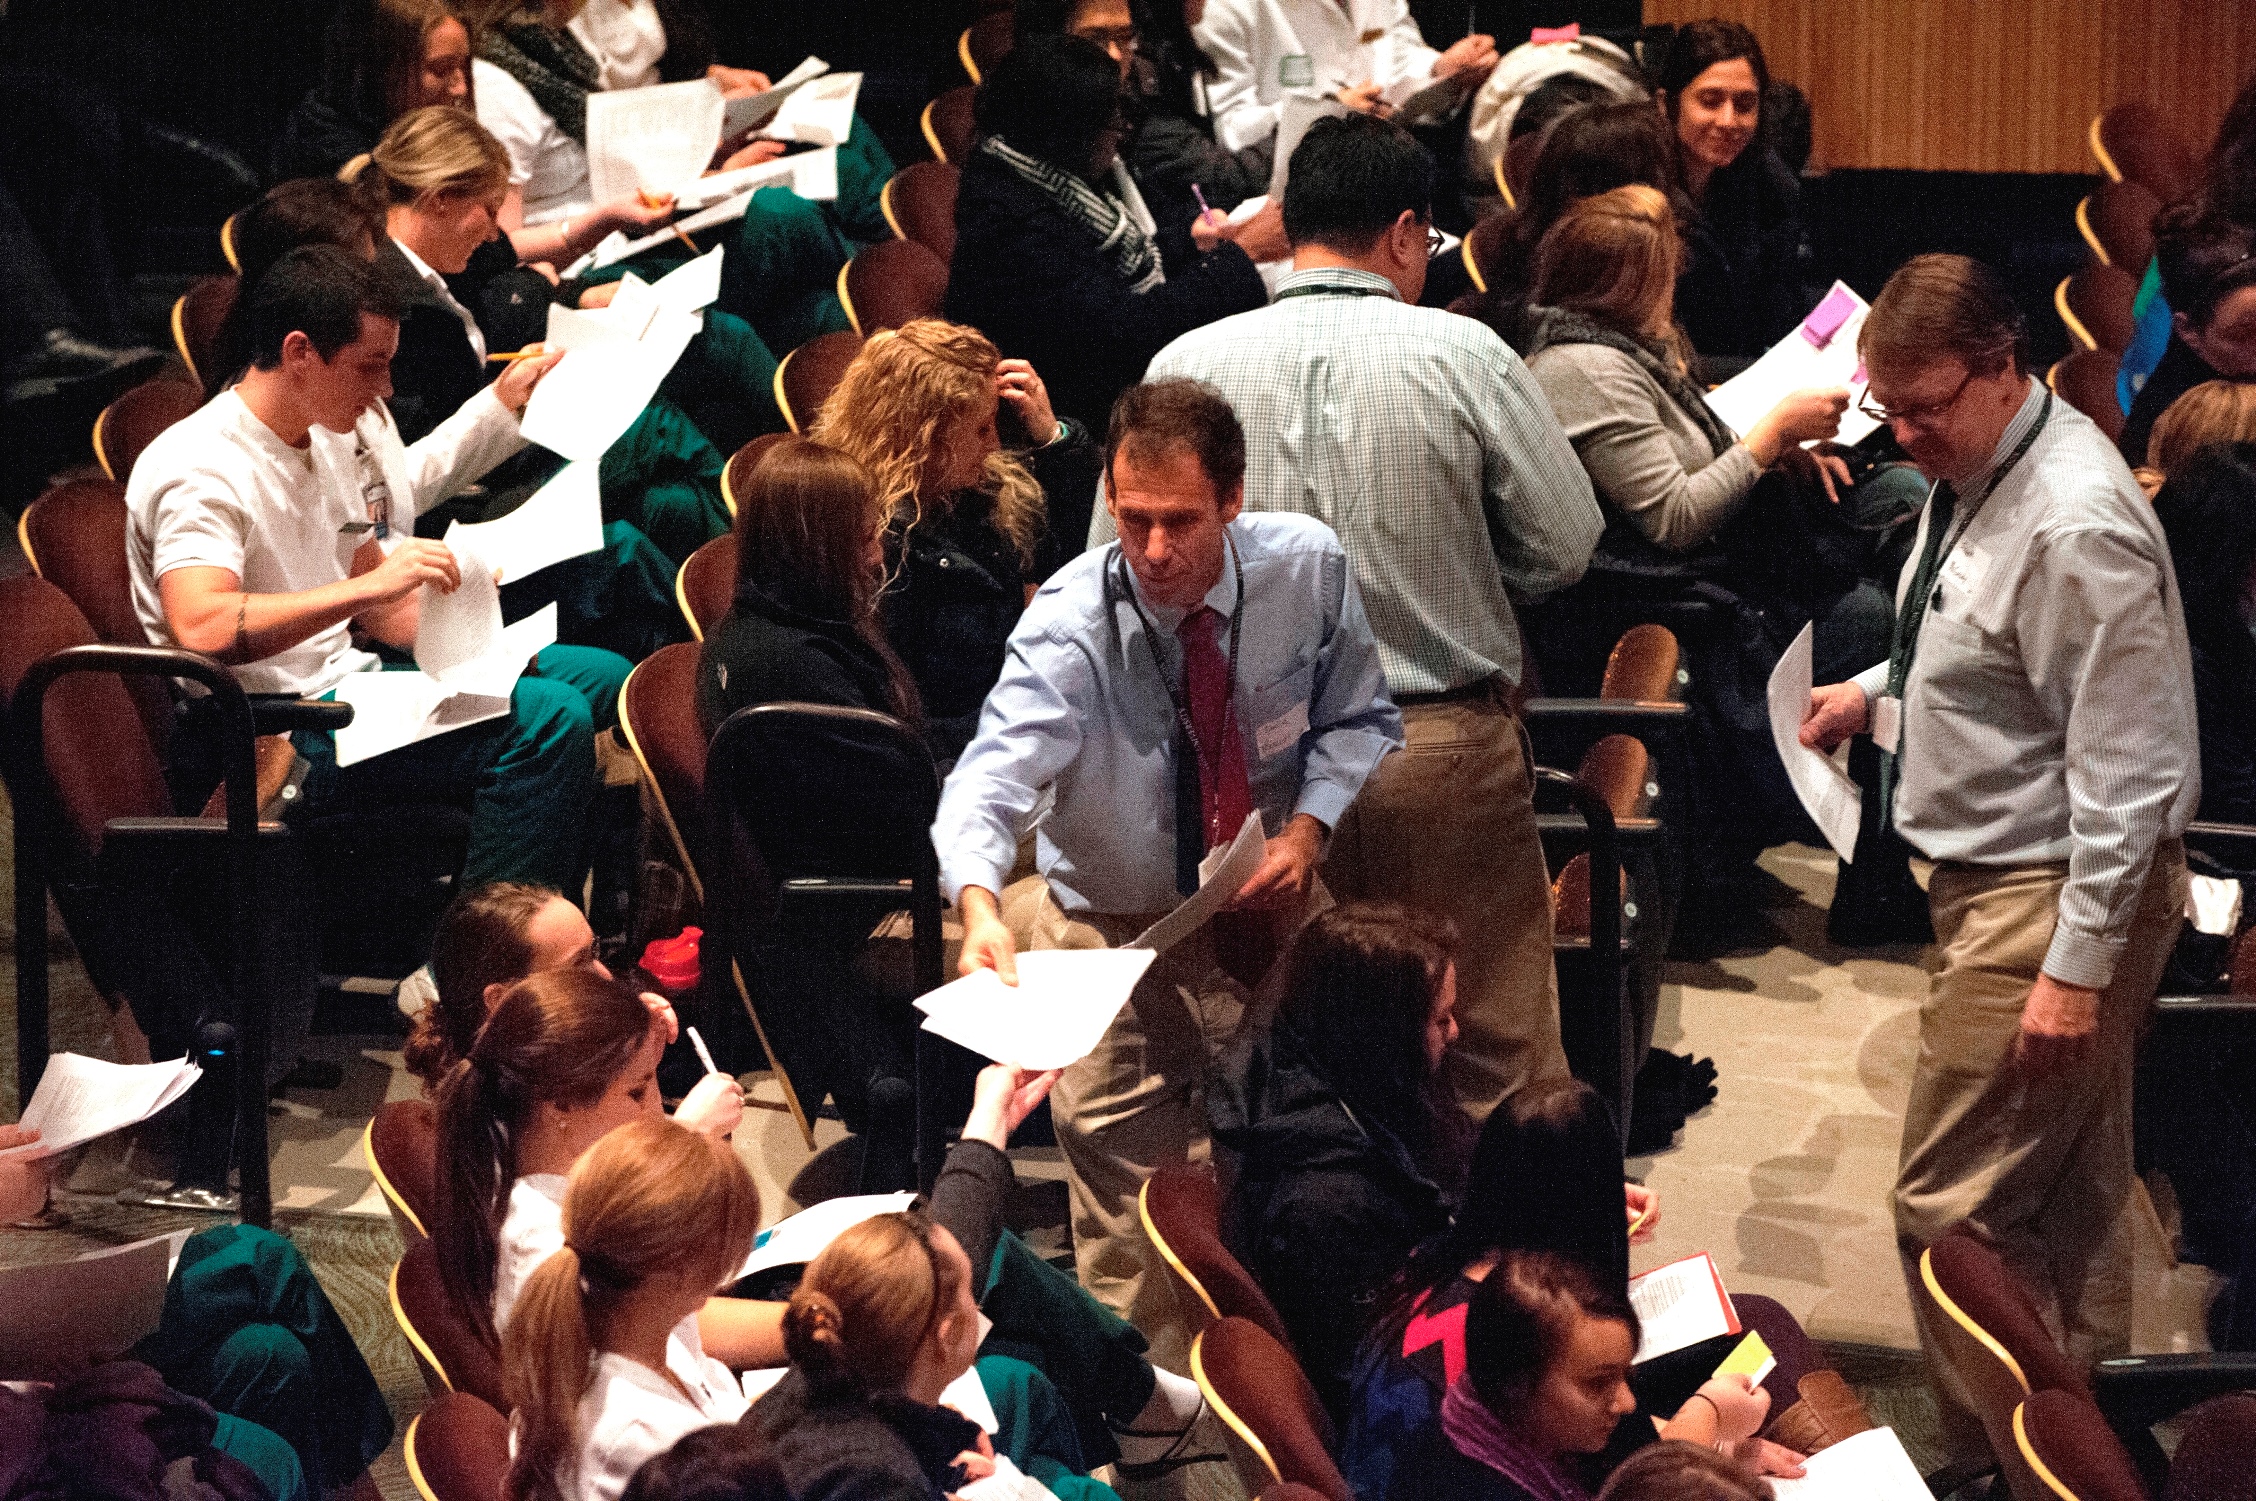 Twenty-five faculty facilitators help engage the more than 300 Husson students participating in the Interprofessional Evening of Conversation.